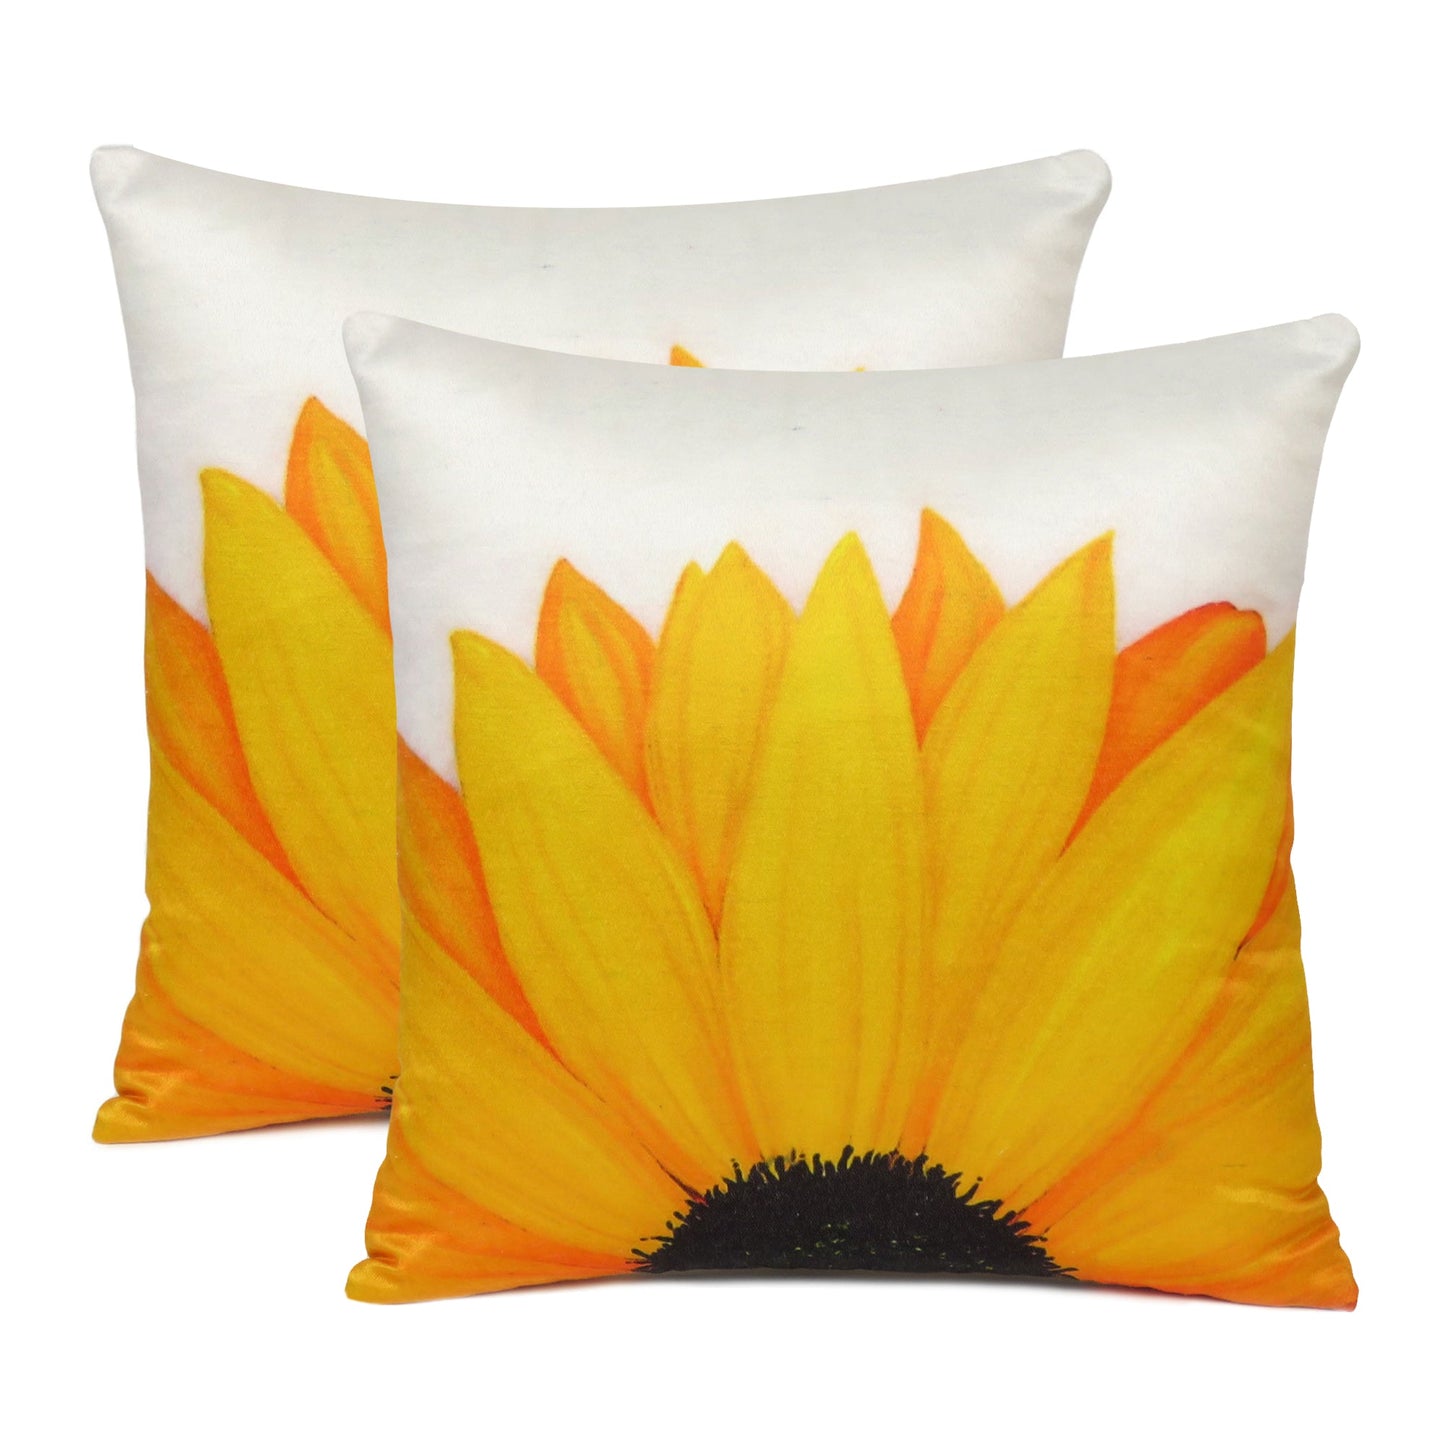 Yellow Sunflower Printed Cushion Cover in Set of 2